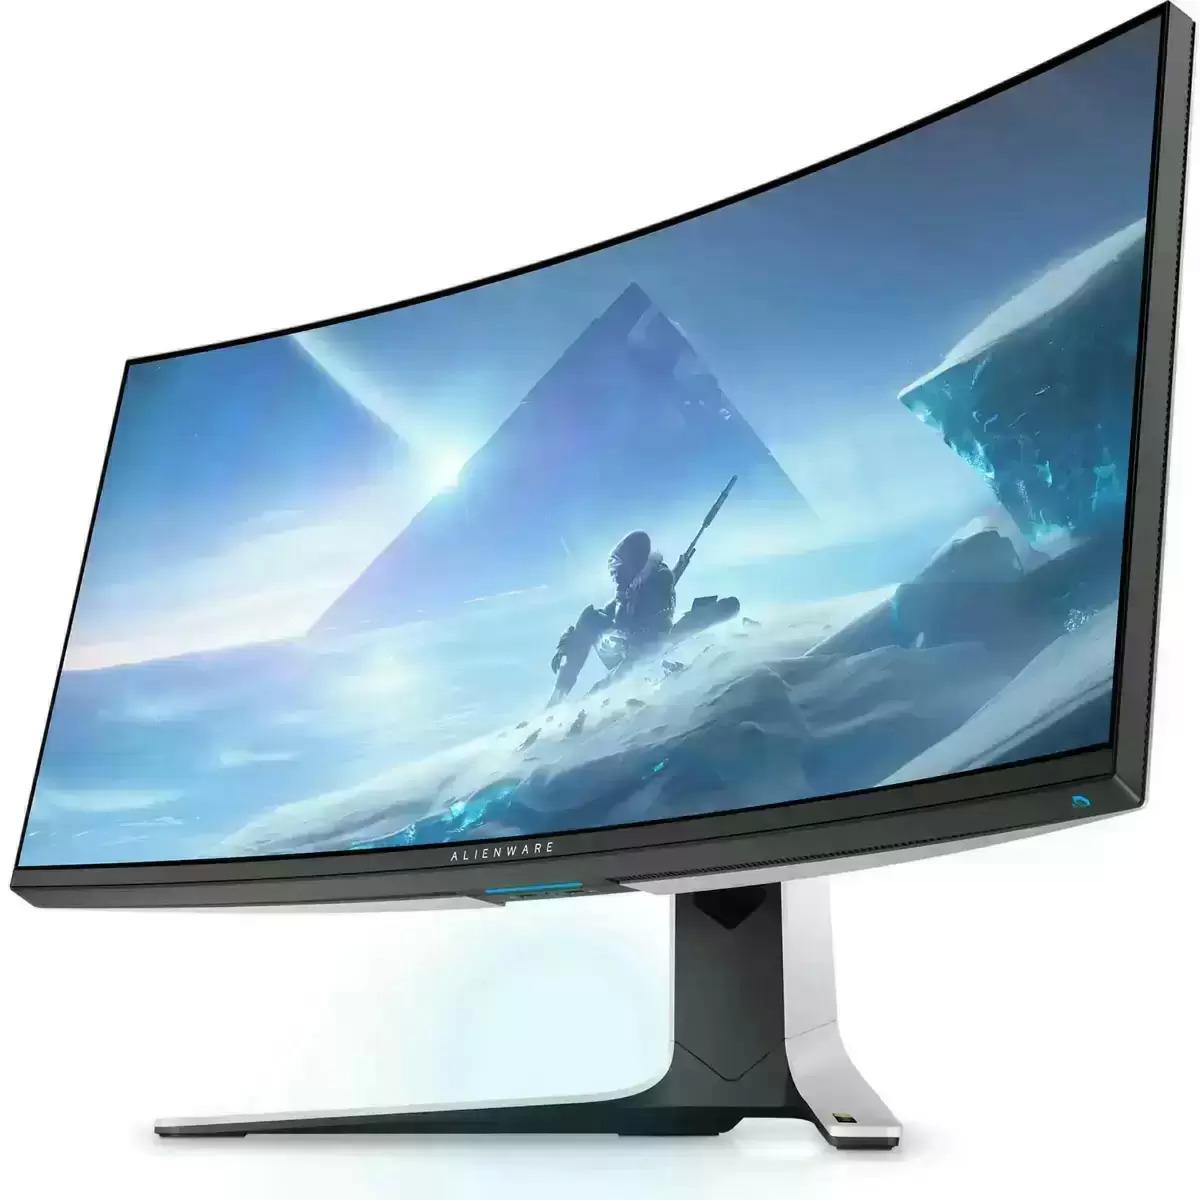 38in Alienware AW3821DW IPS Curved Gaming Monitor for $799.99 Shipped